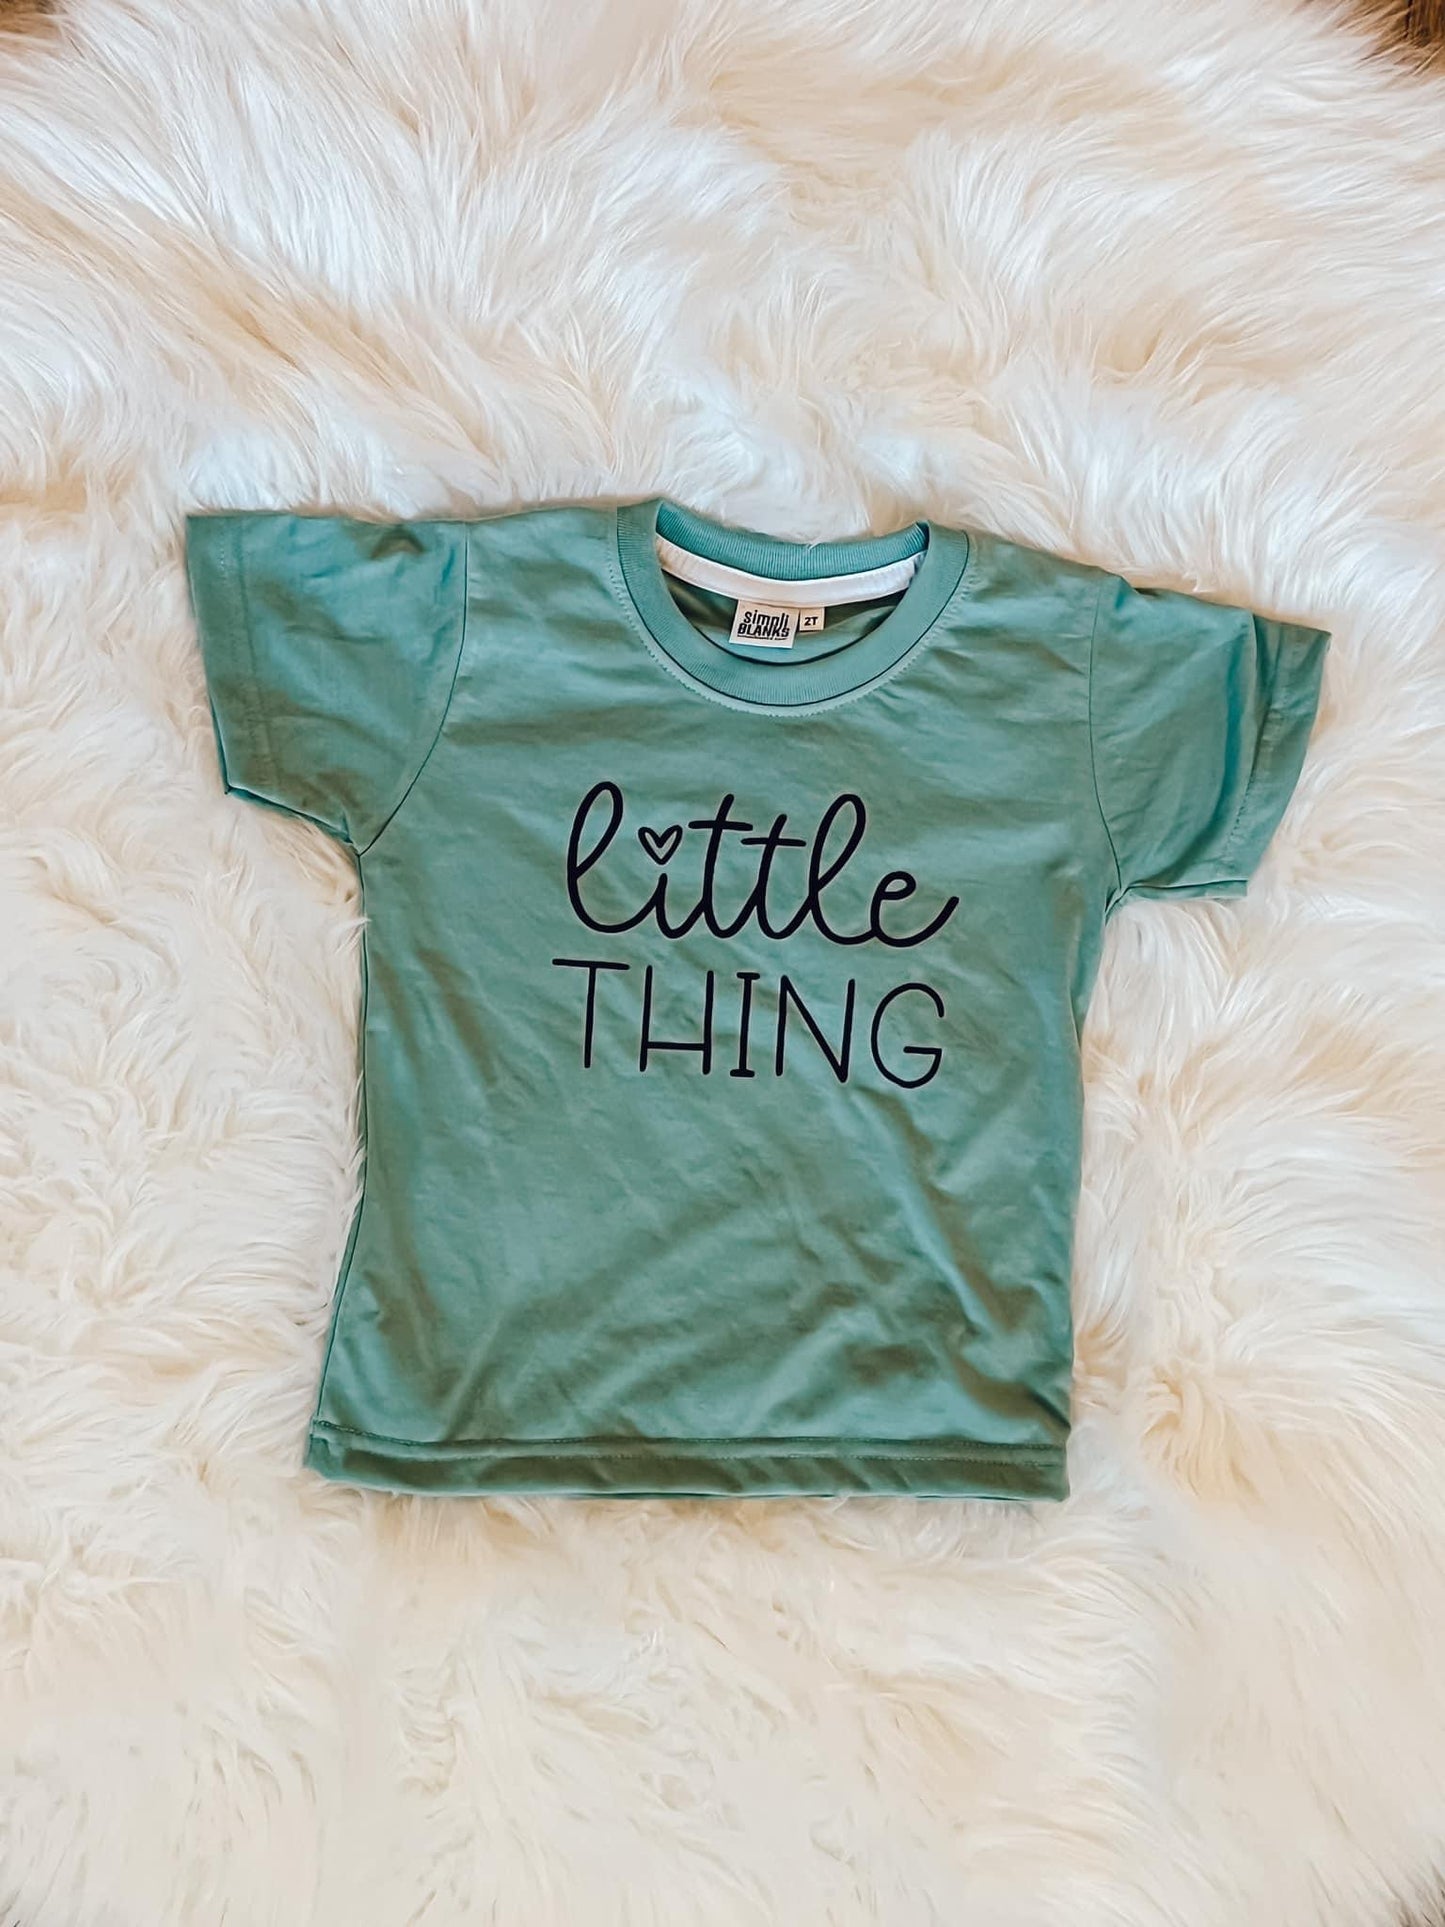 It’s the Little Things Shirt